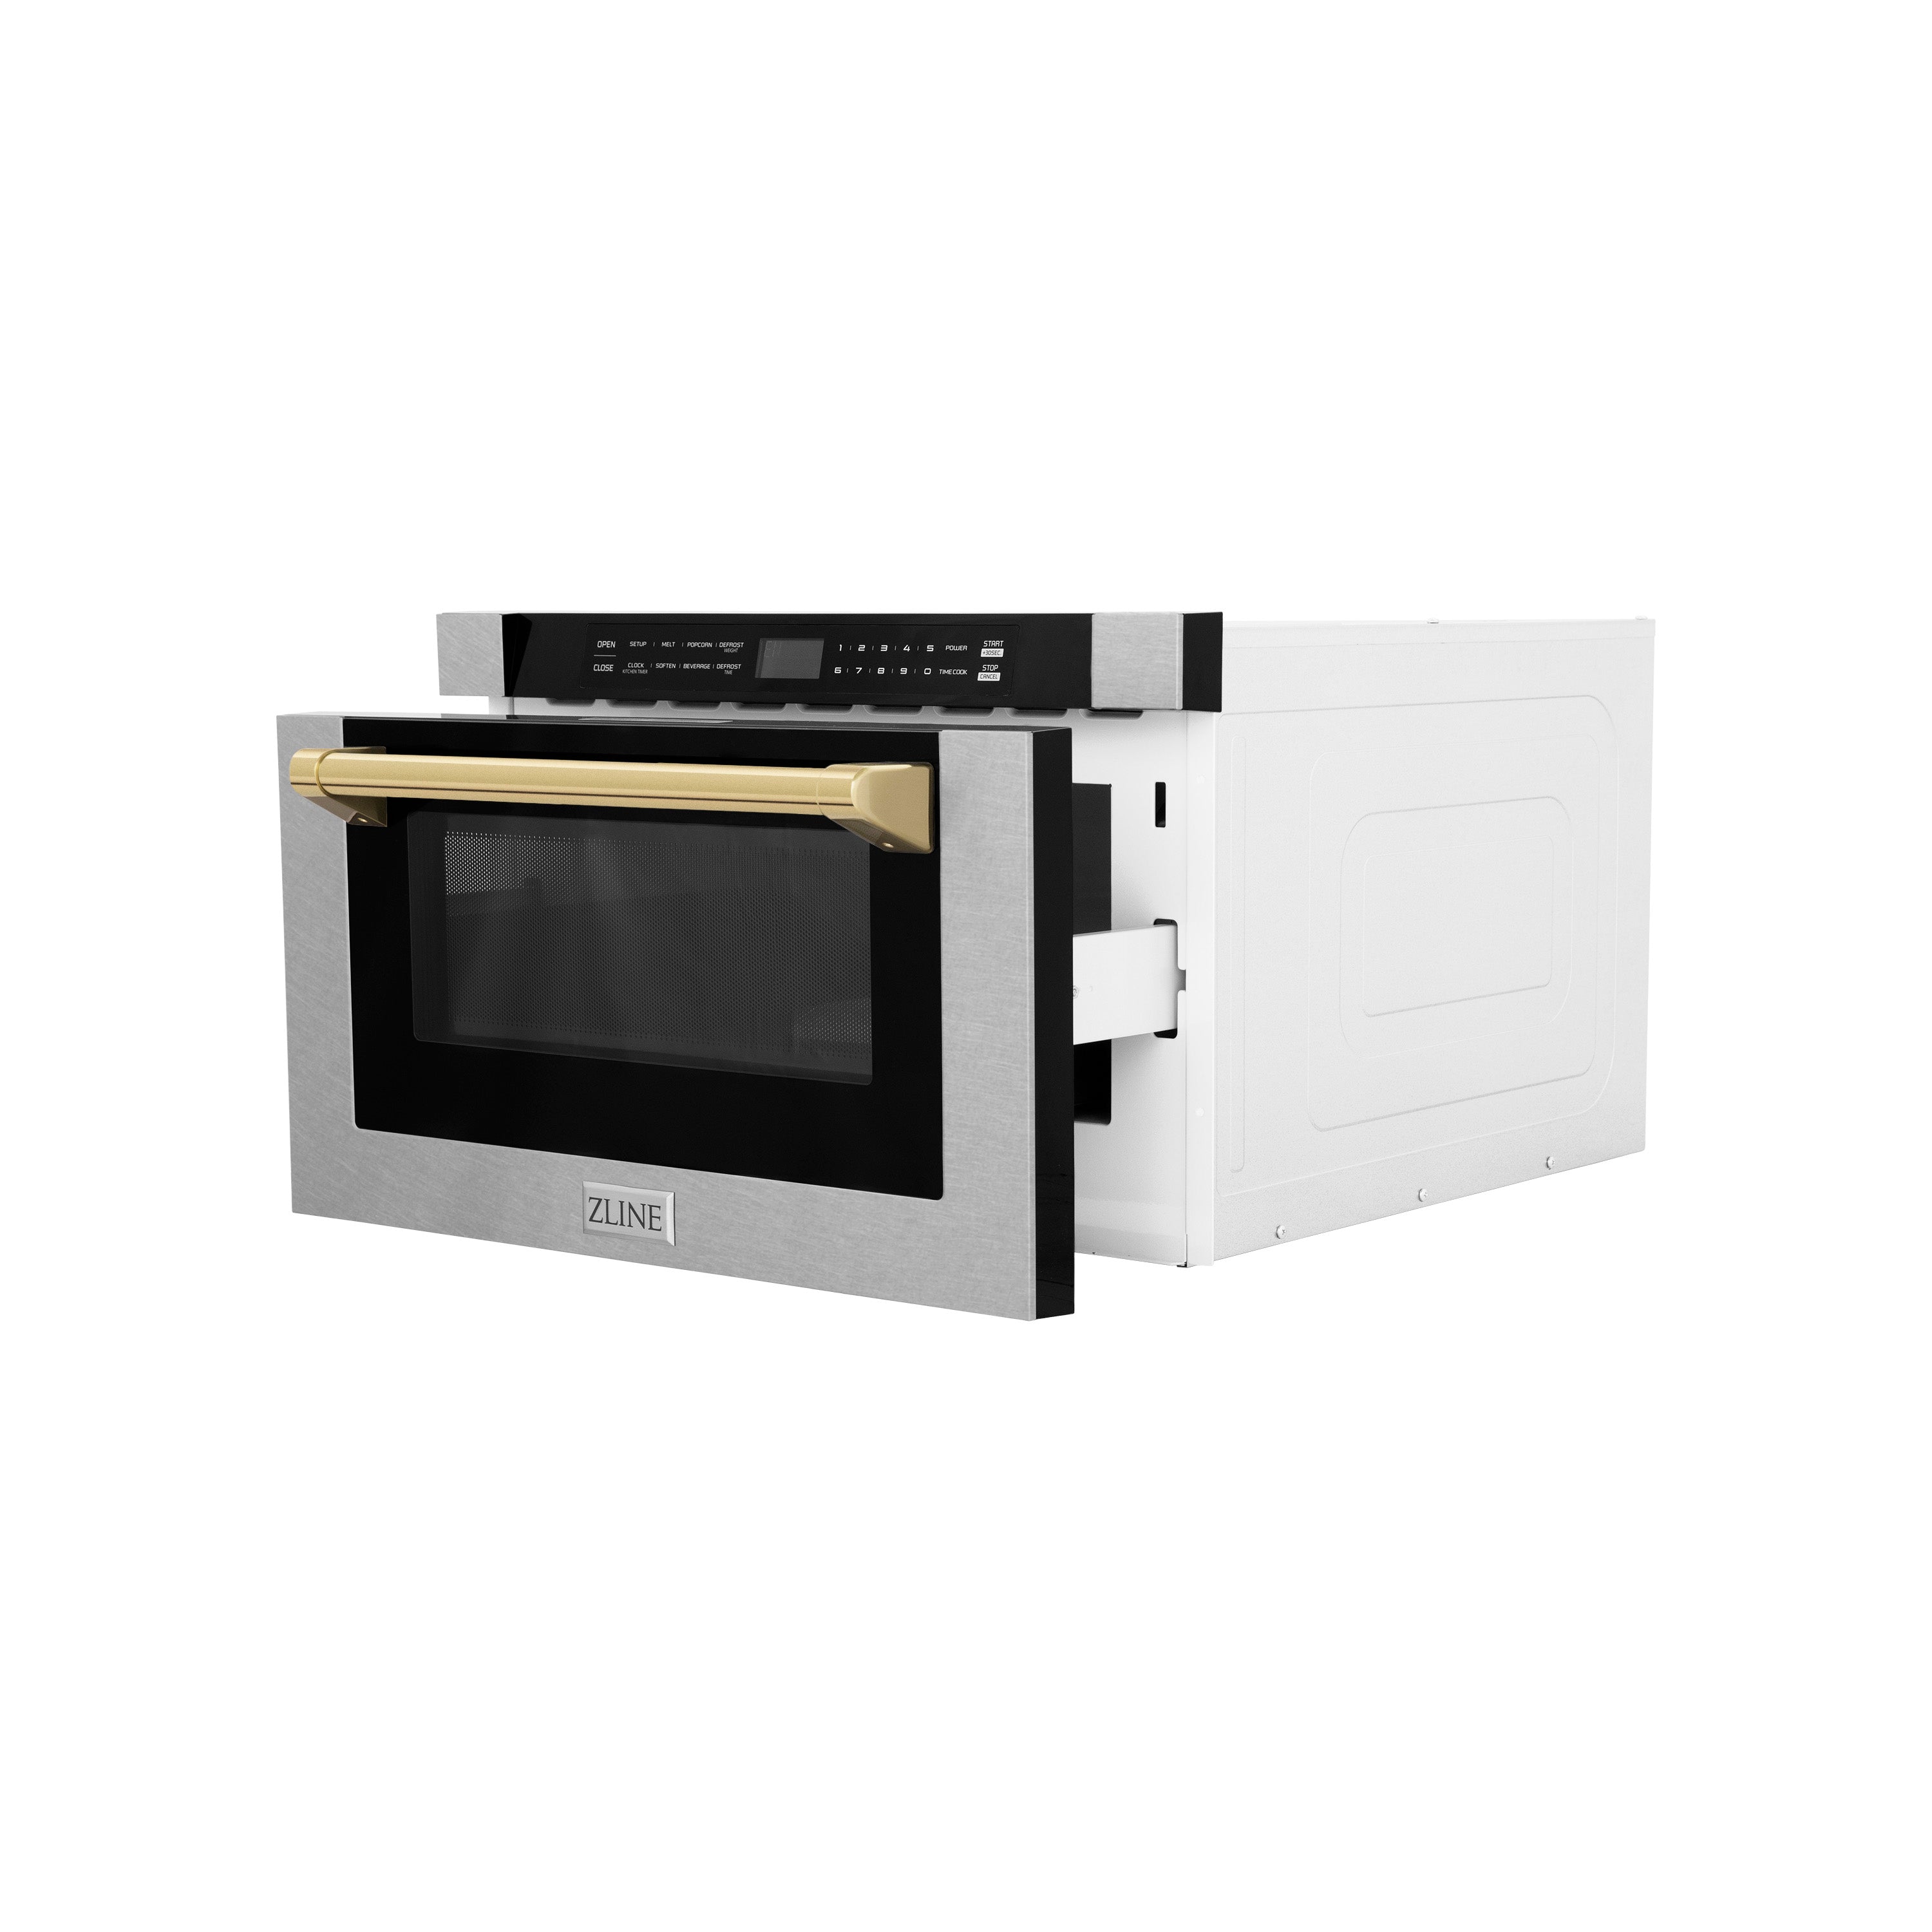 ZLINE Autograph Edition 24" 1.2 cu. ft. Built-in Microwave Drawer with a Traditional Handle in Fingerprint Resistant Stainless Steel and Polished Gold Accents